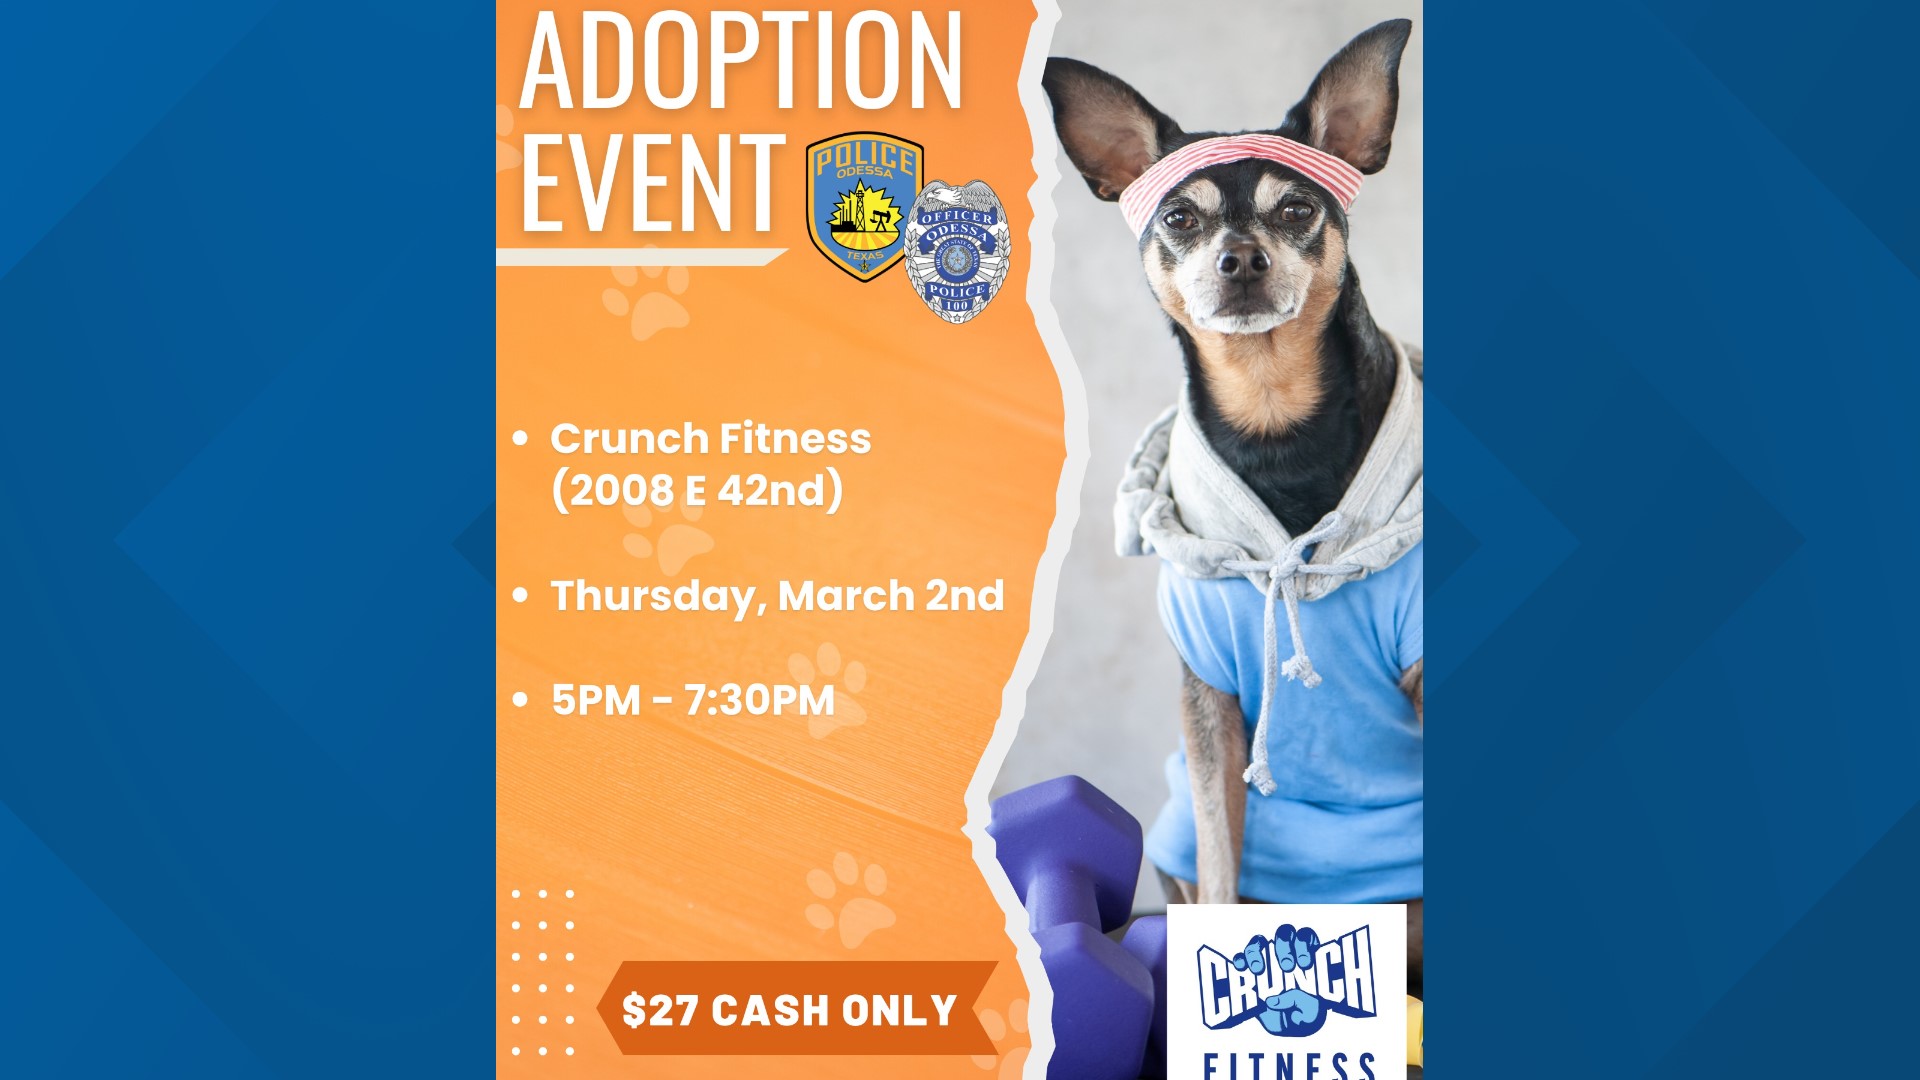 Odessa Animal Shelter to host adoption event on March 2 